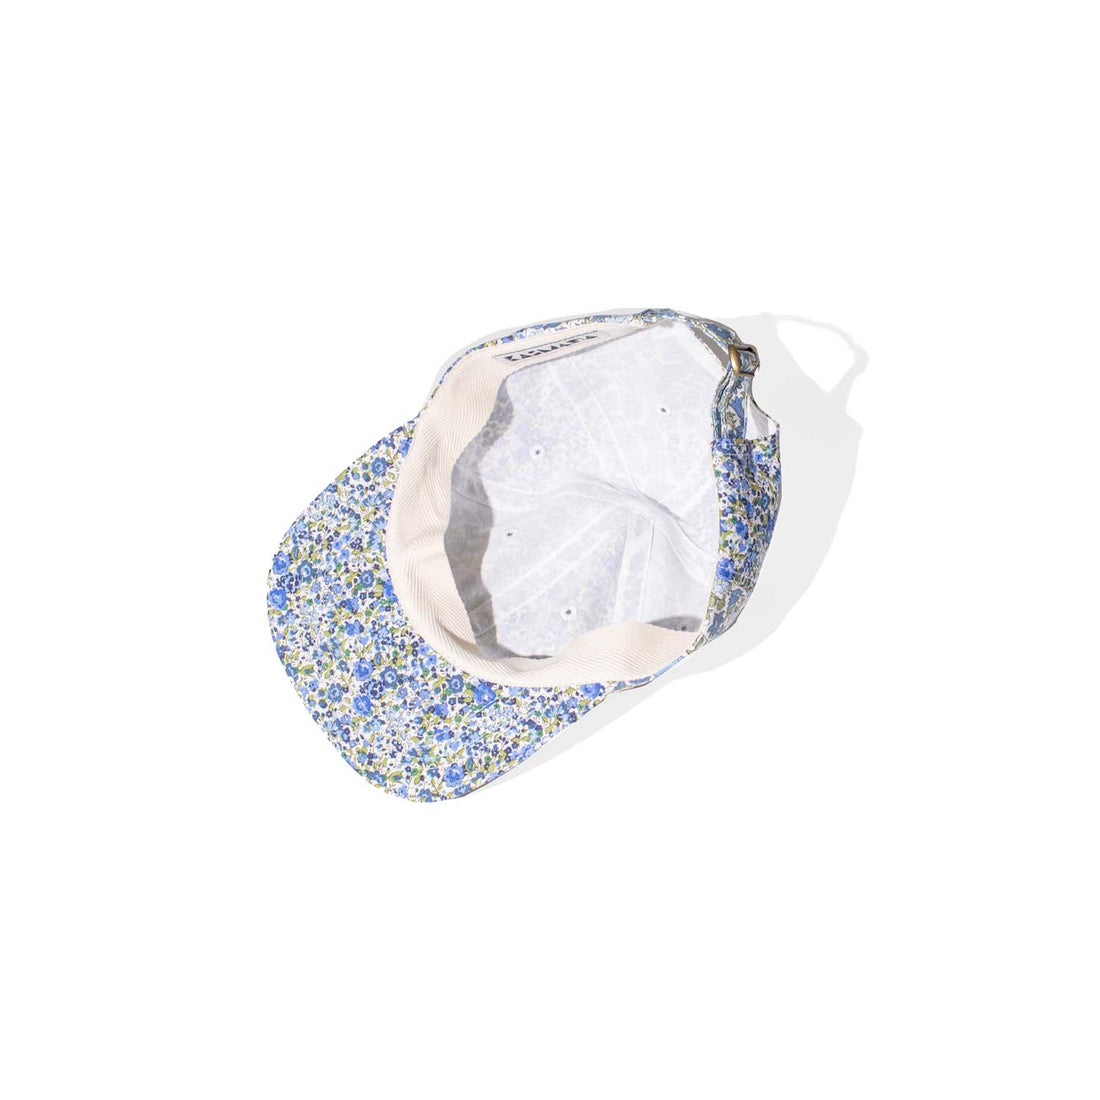 KasMaria Baseball Hat in Mixed Blue Floral